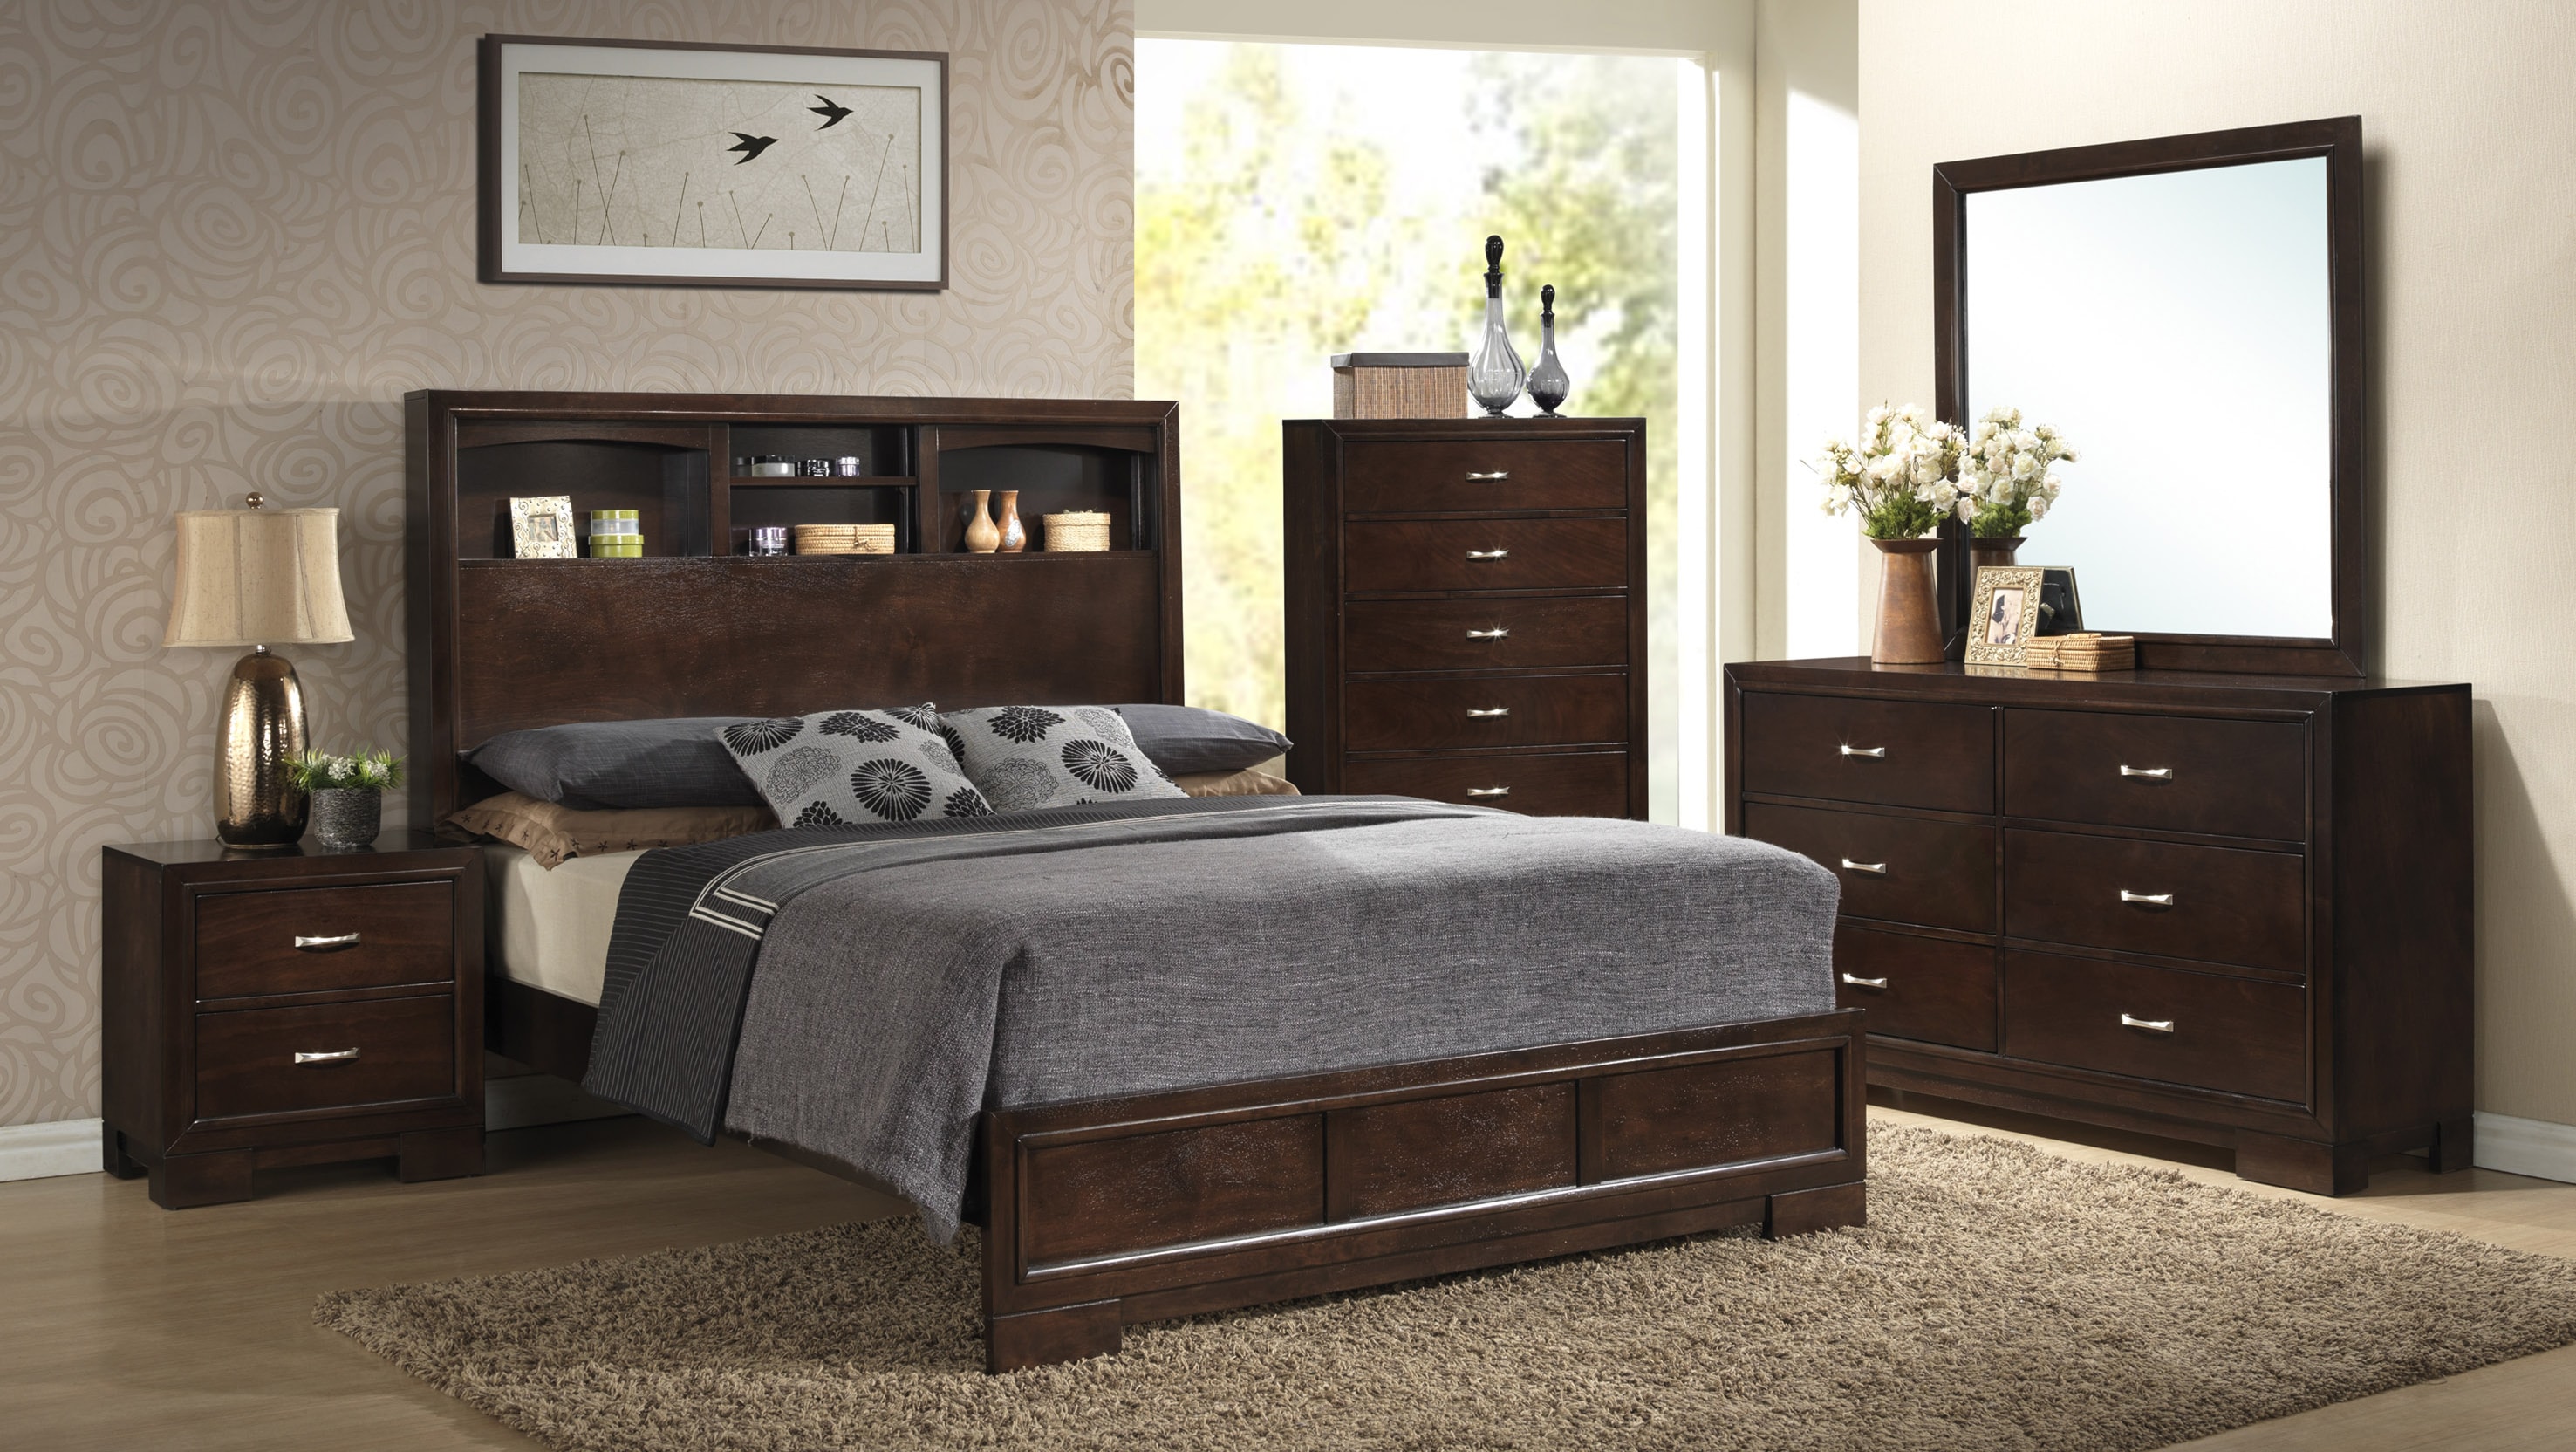 C4233 Bookie Queen Bedroom Group includes Queen Bed, Dresser and Mirror.  Additional items pictures include chest and nightstand.